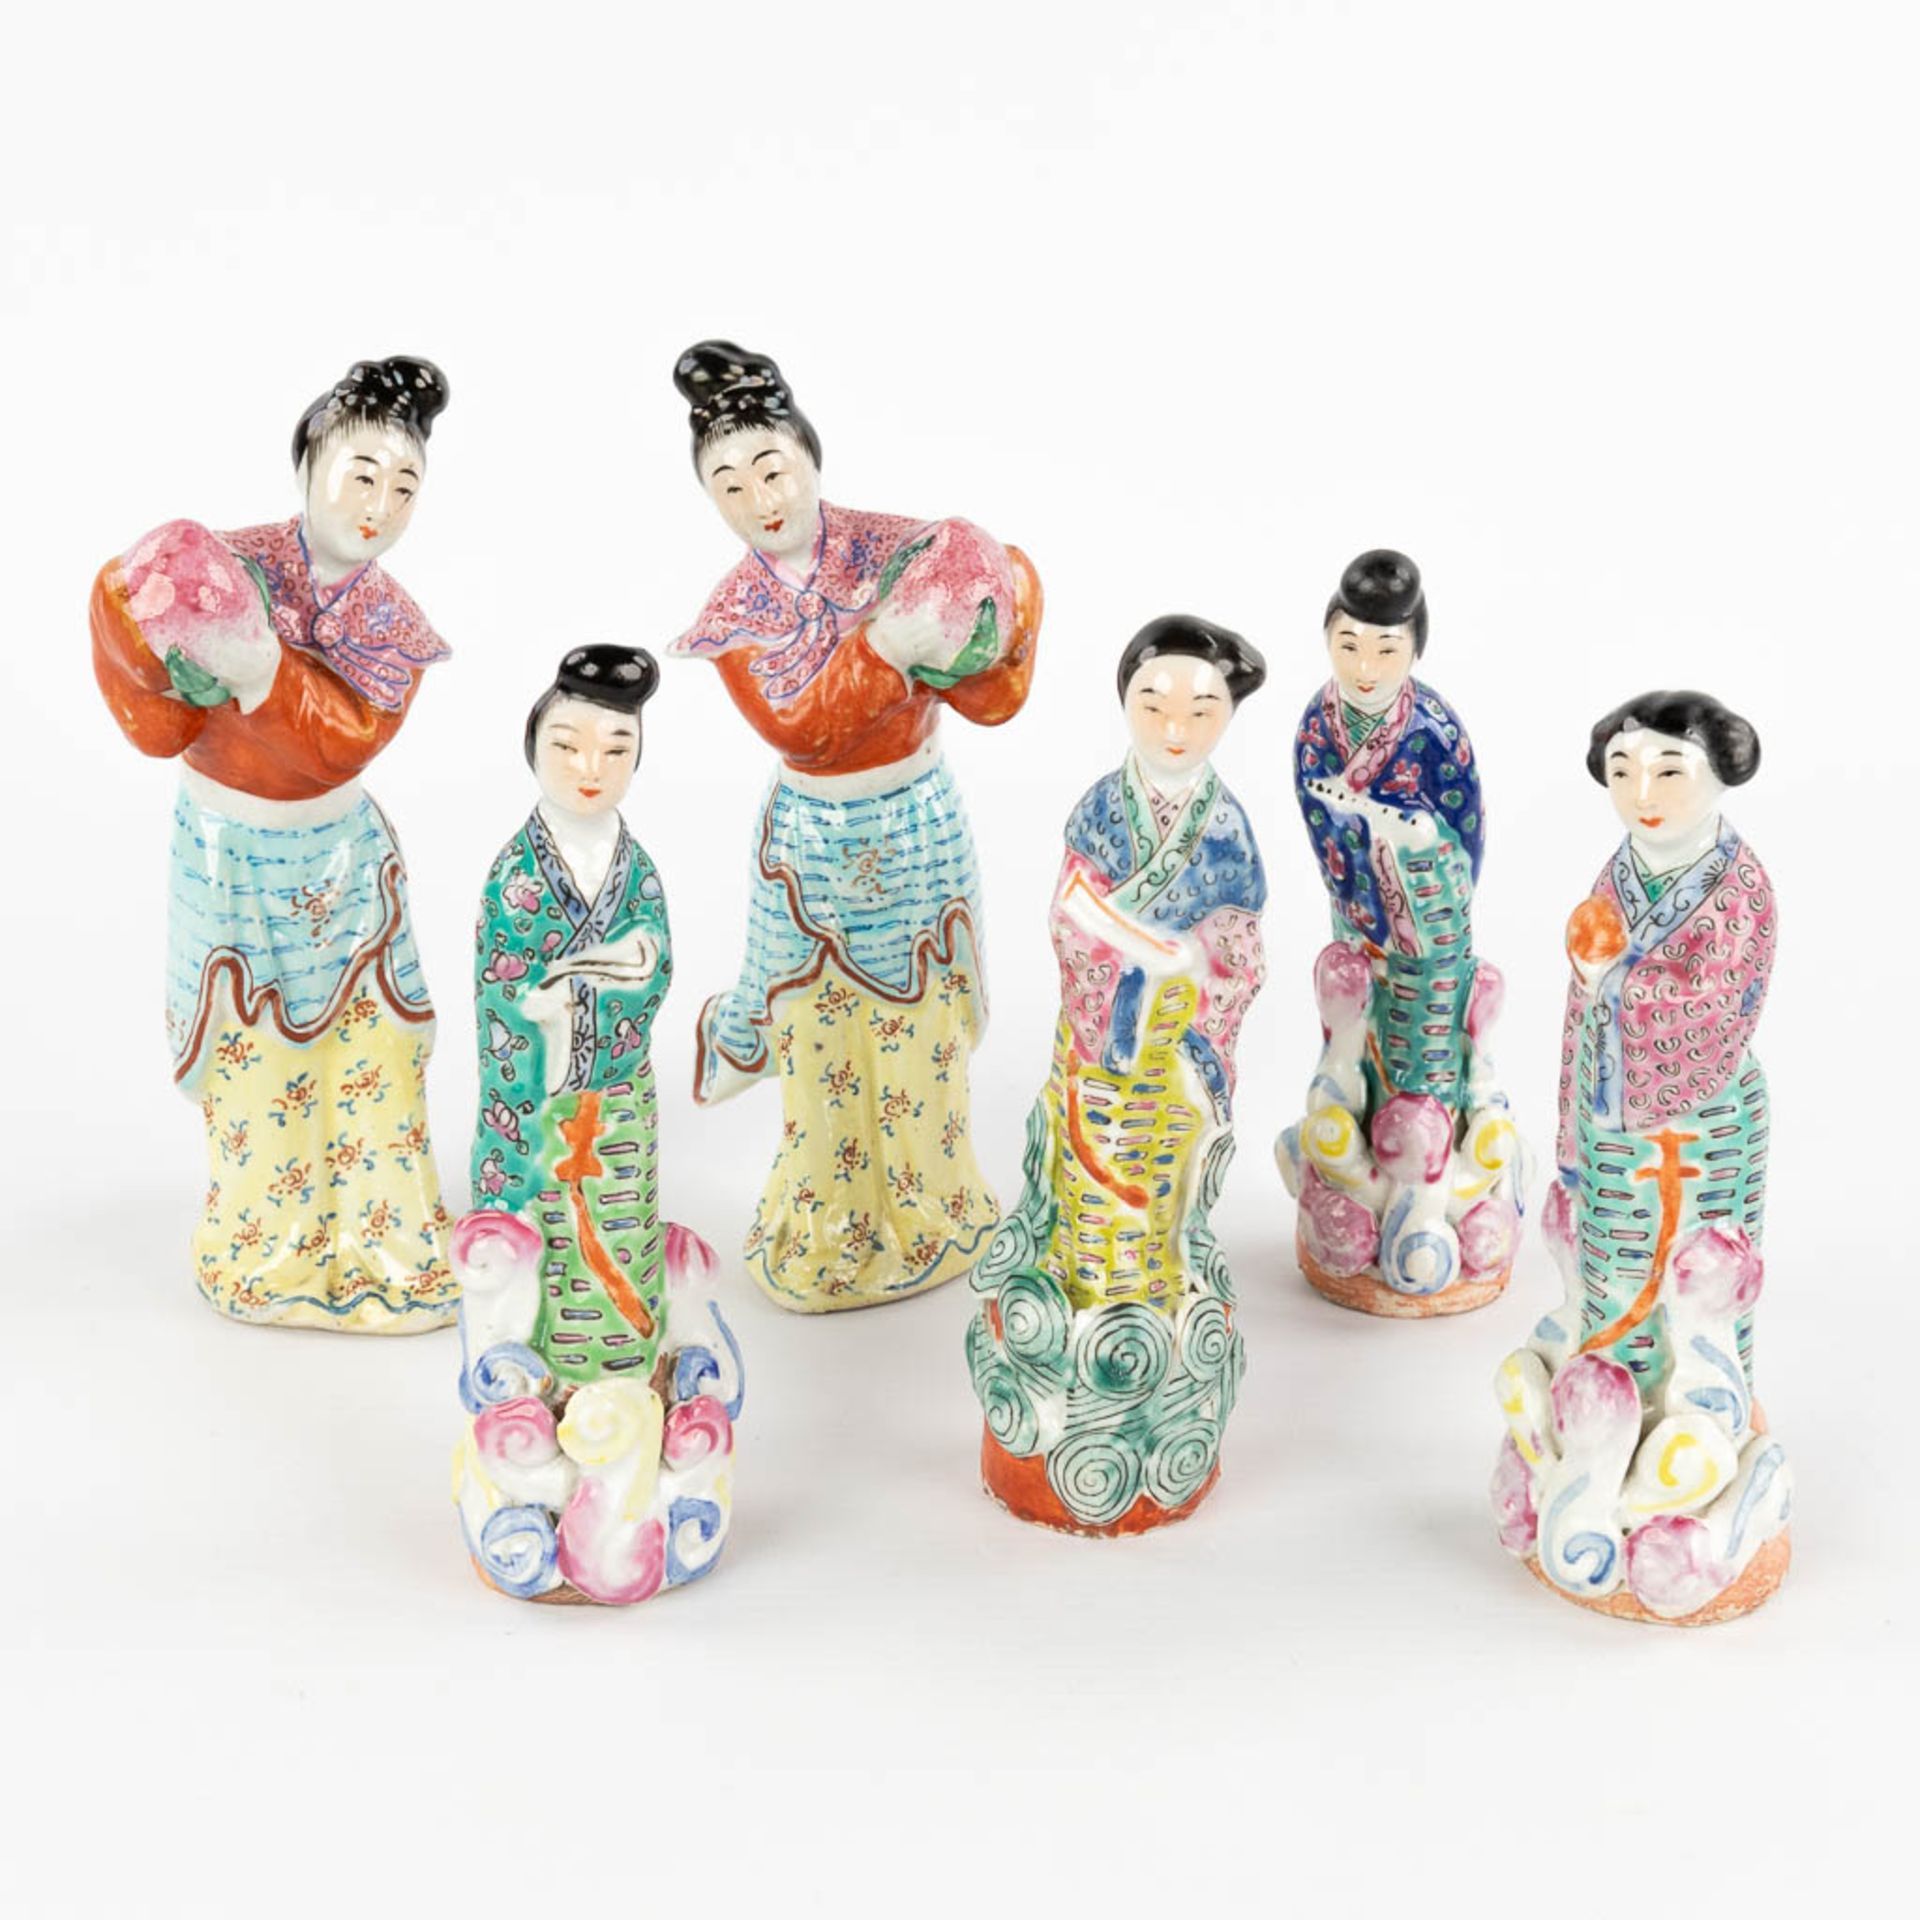 A collection of 6 Chinese figurines, 3 pairs, Famille Rose Porcelain. Republic period. 20th C. (L:7